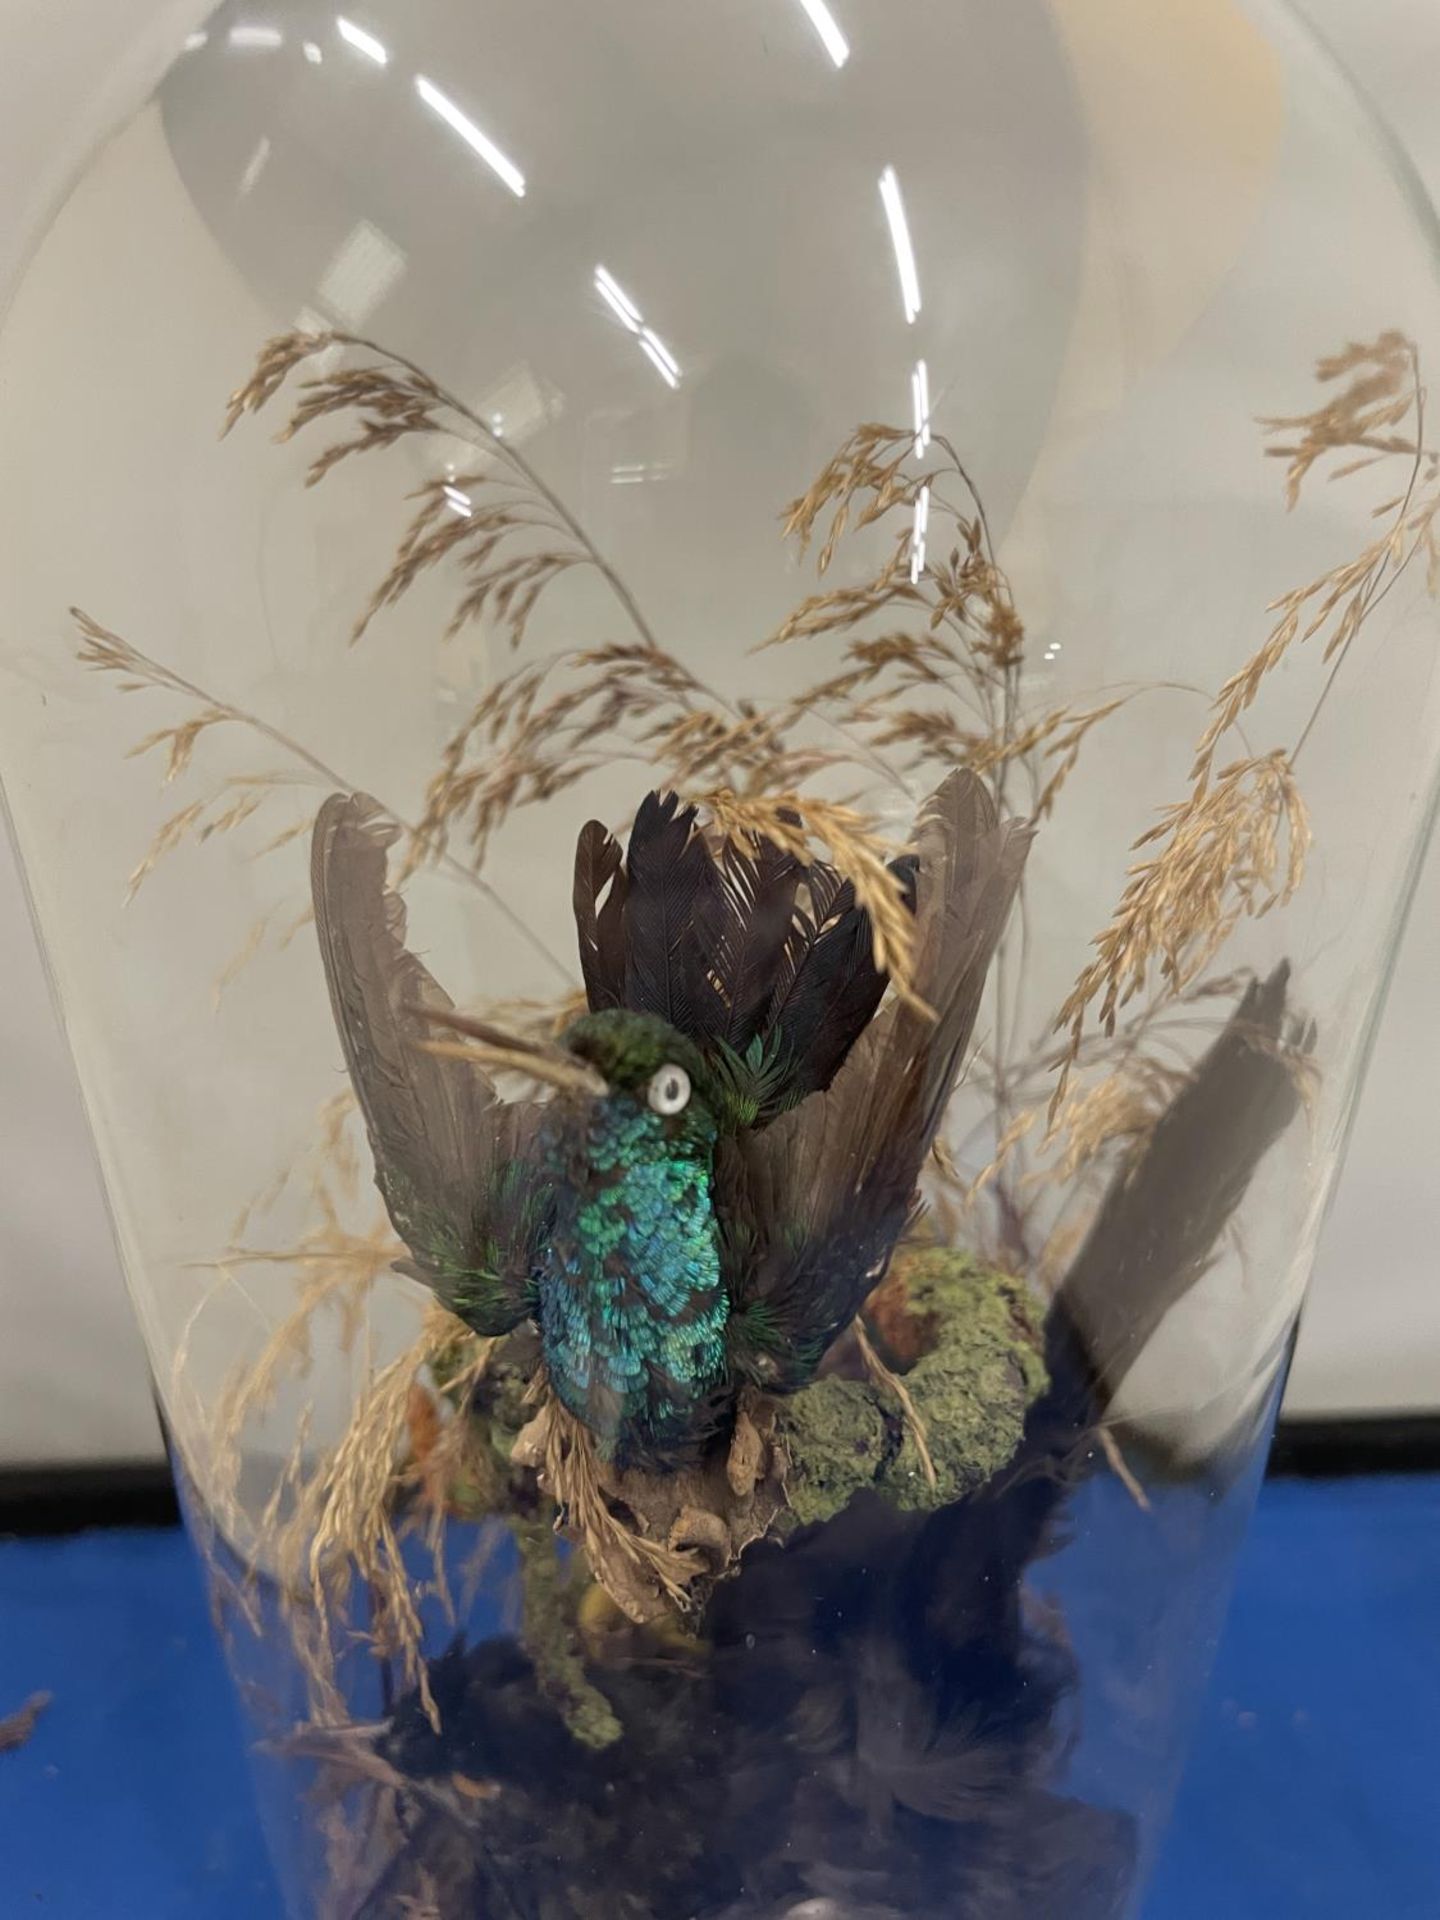 A TAXIDERMY OF TWO BIRDS ON A LOG WITH FOLIAGE IN A GLASS DOME - Image 3 of 8